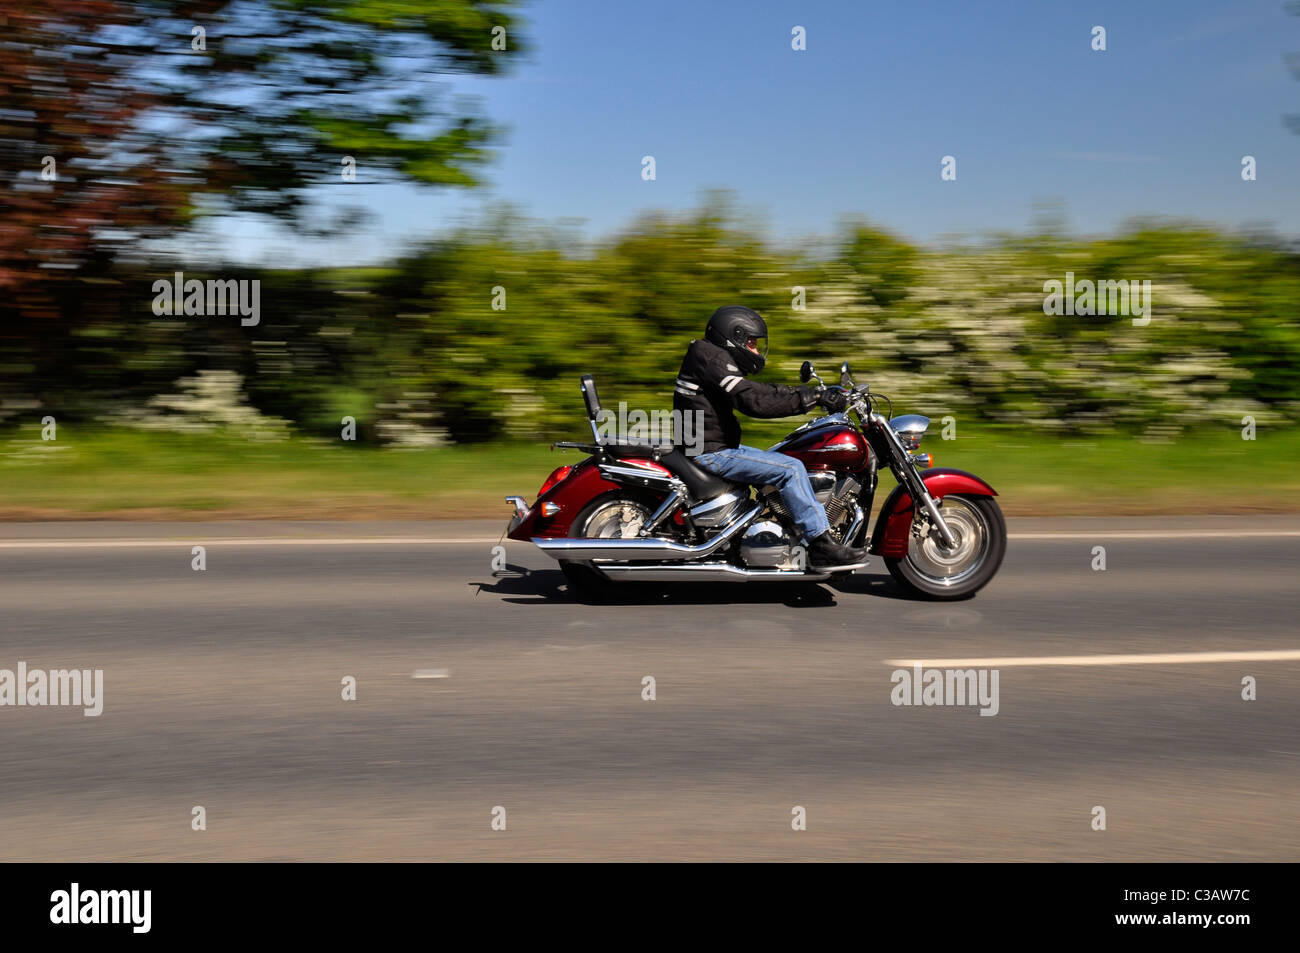 Harley Davidson Motorcycle and Rider with motion blur Stock Photo